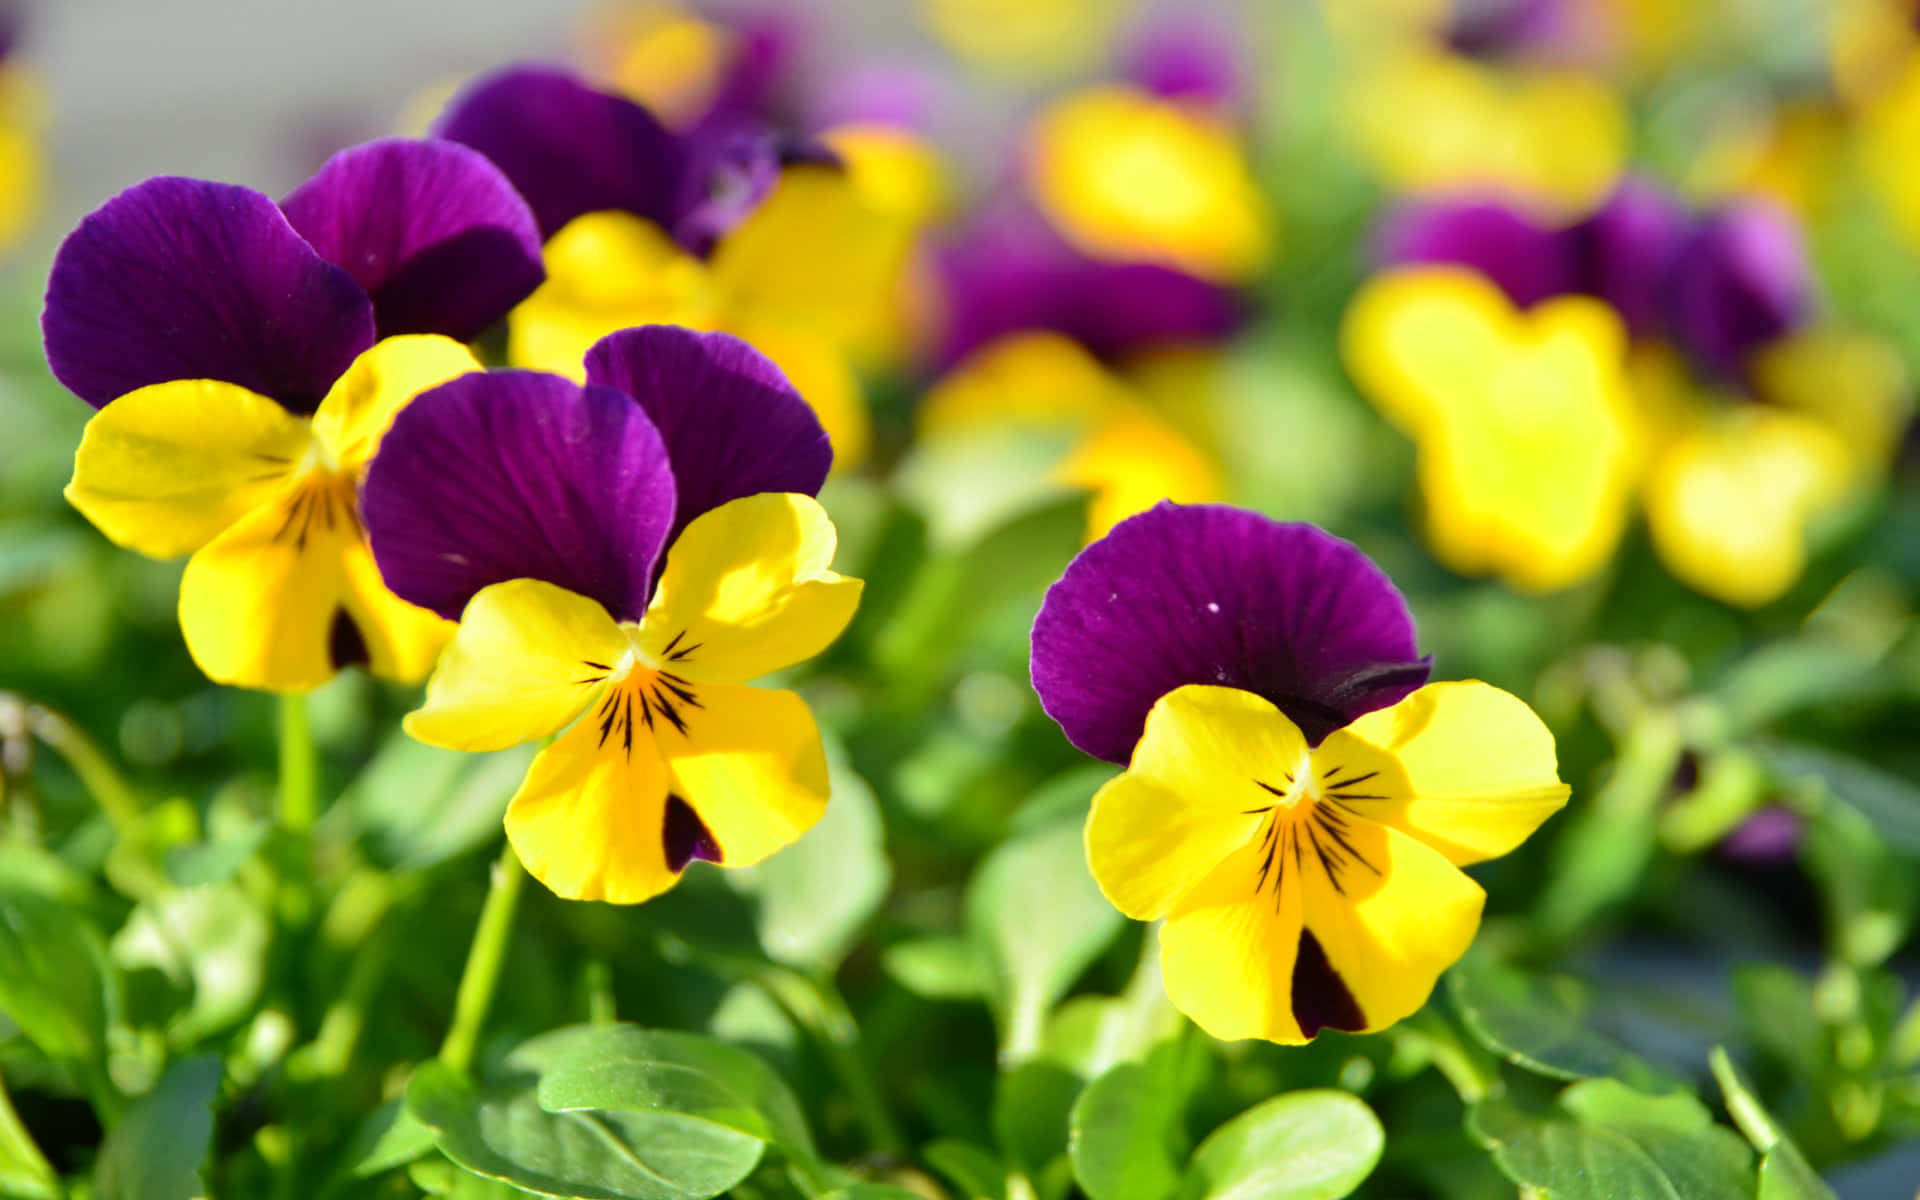 A Group Of Purple And Yellow Pansies Are Growing In The Ground